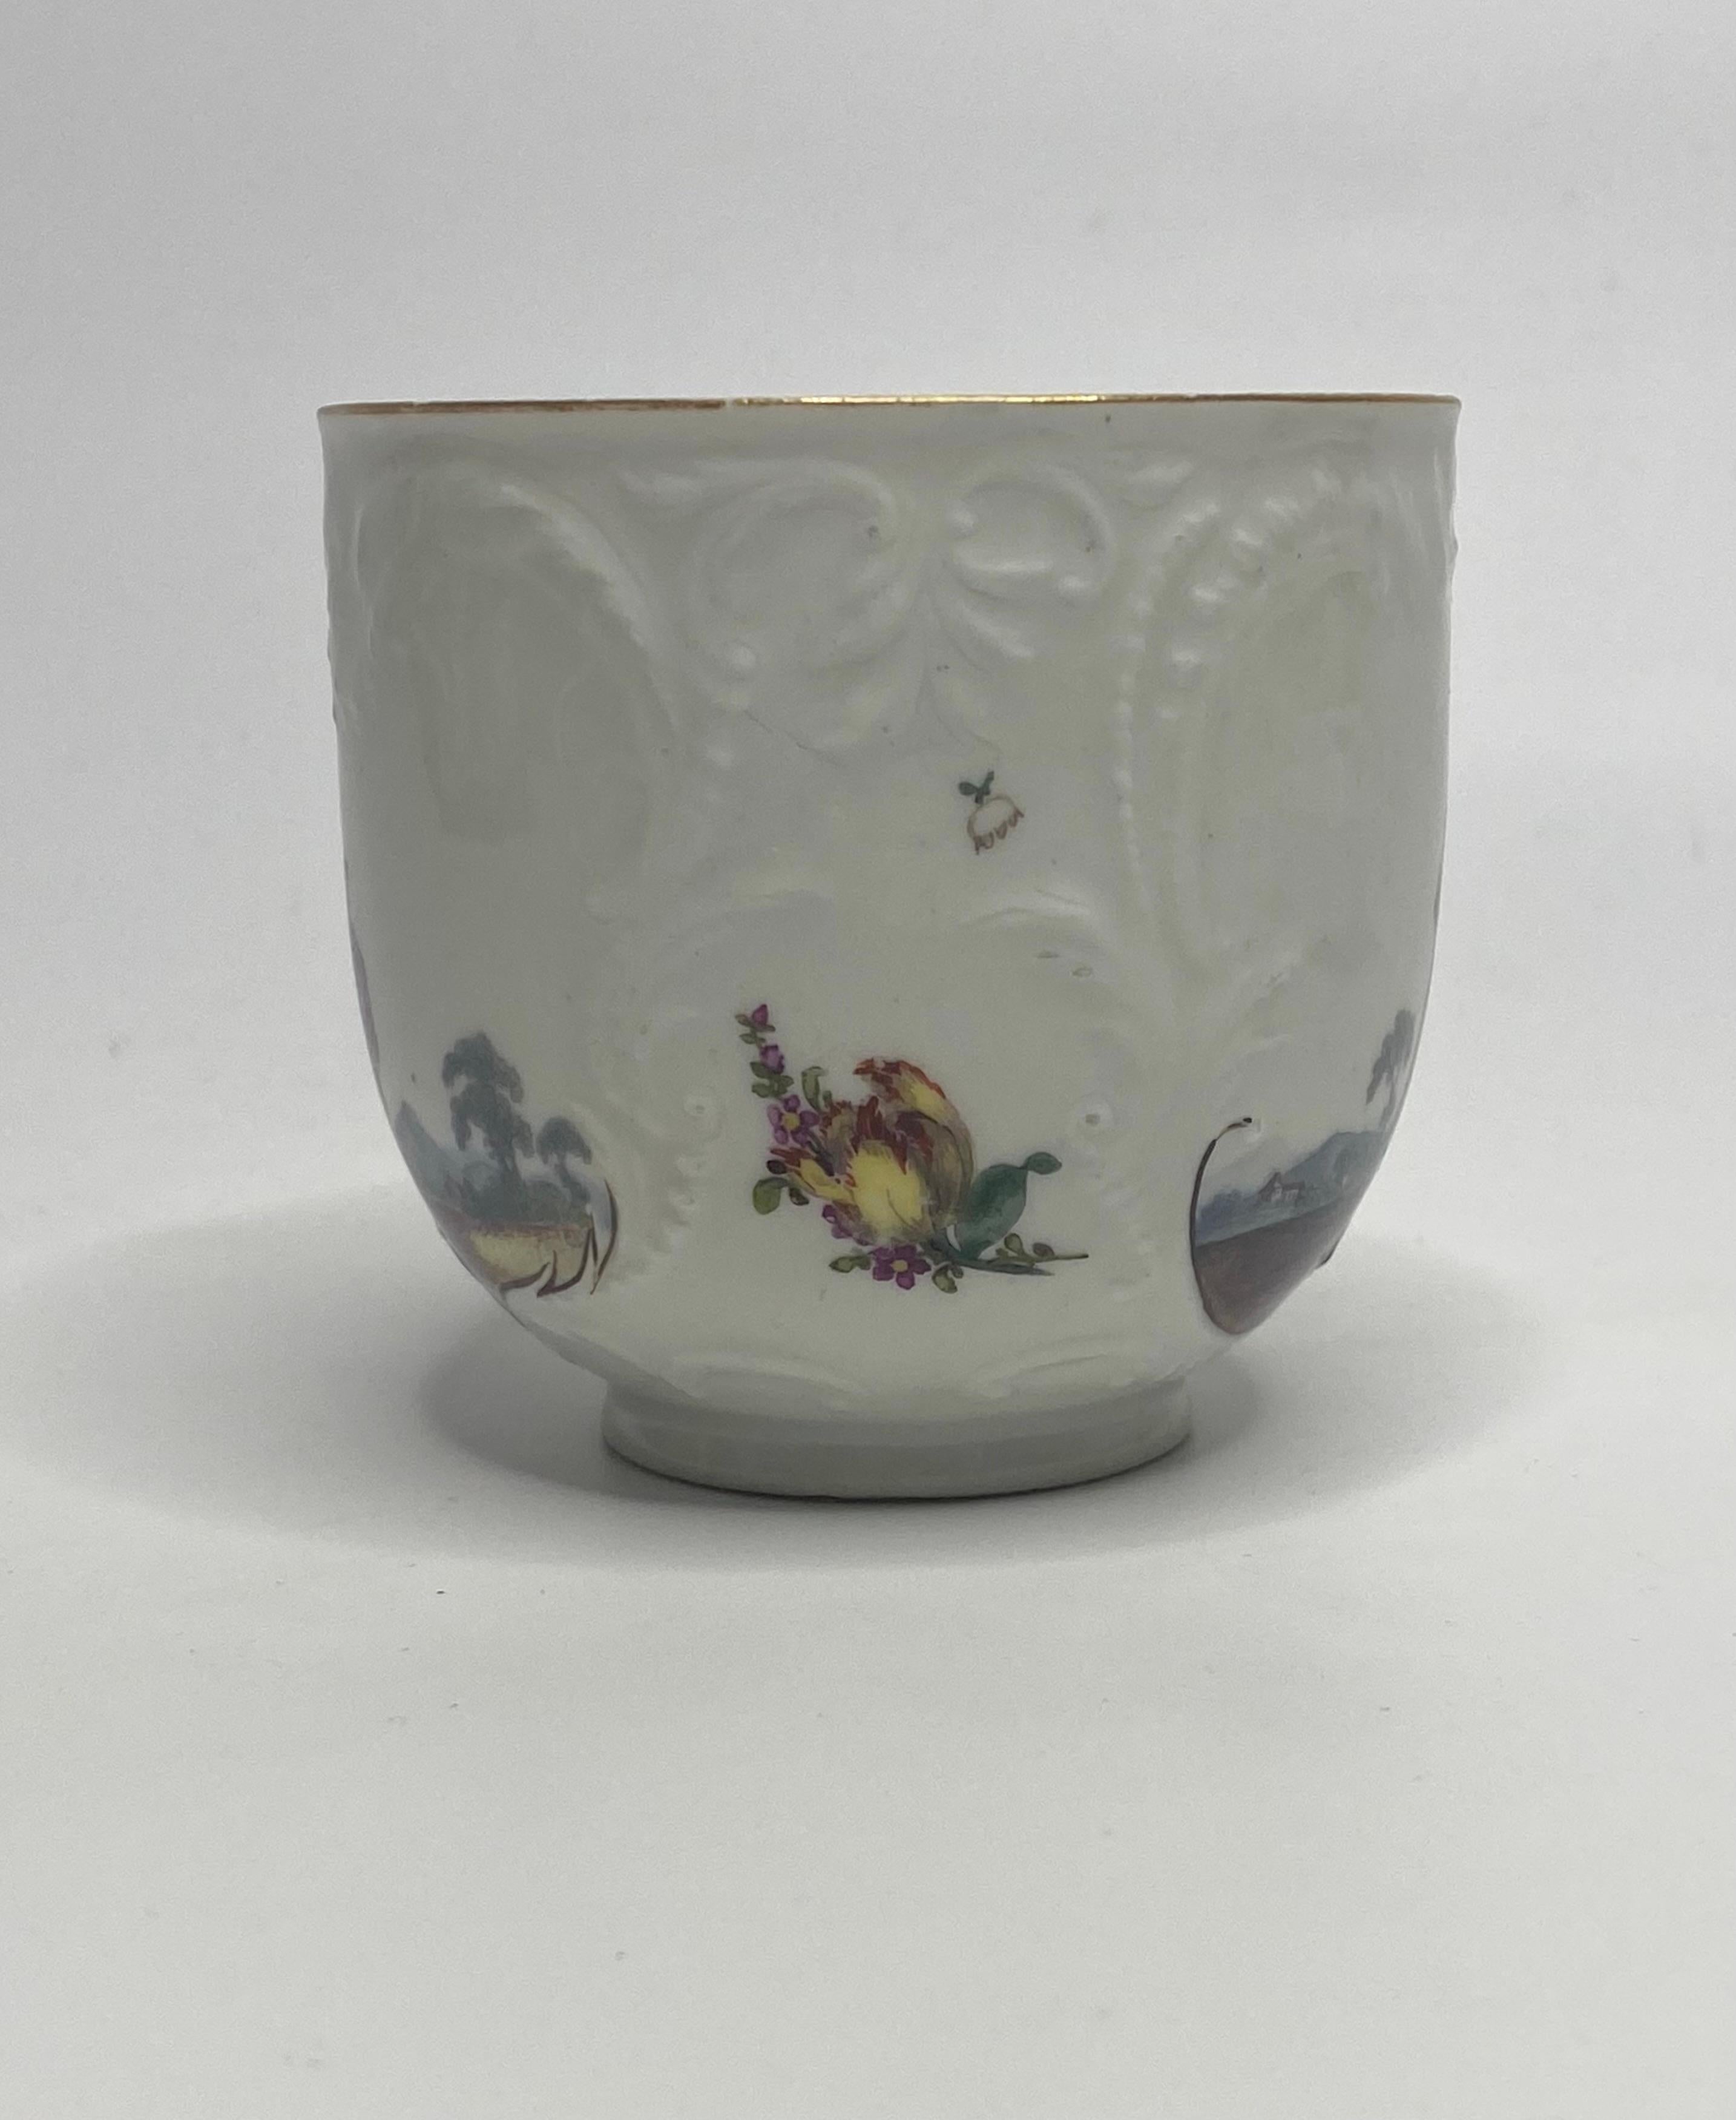 Meissen porcelain cup and saucer, c. 1740. 3